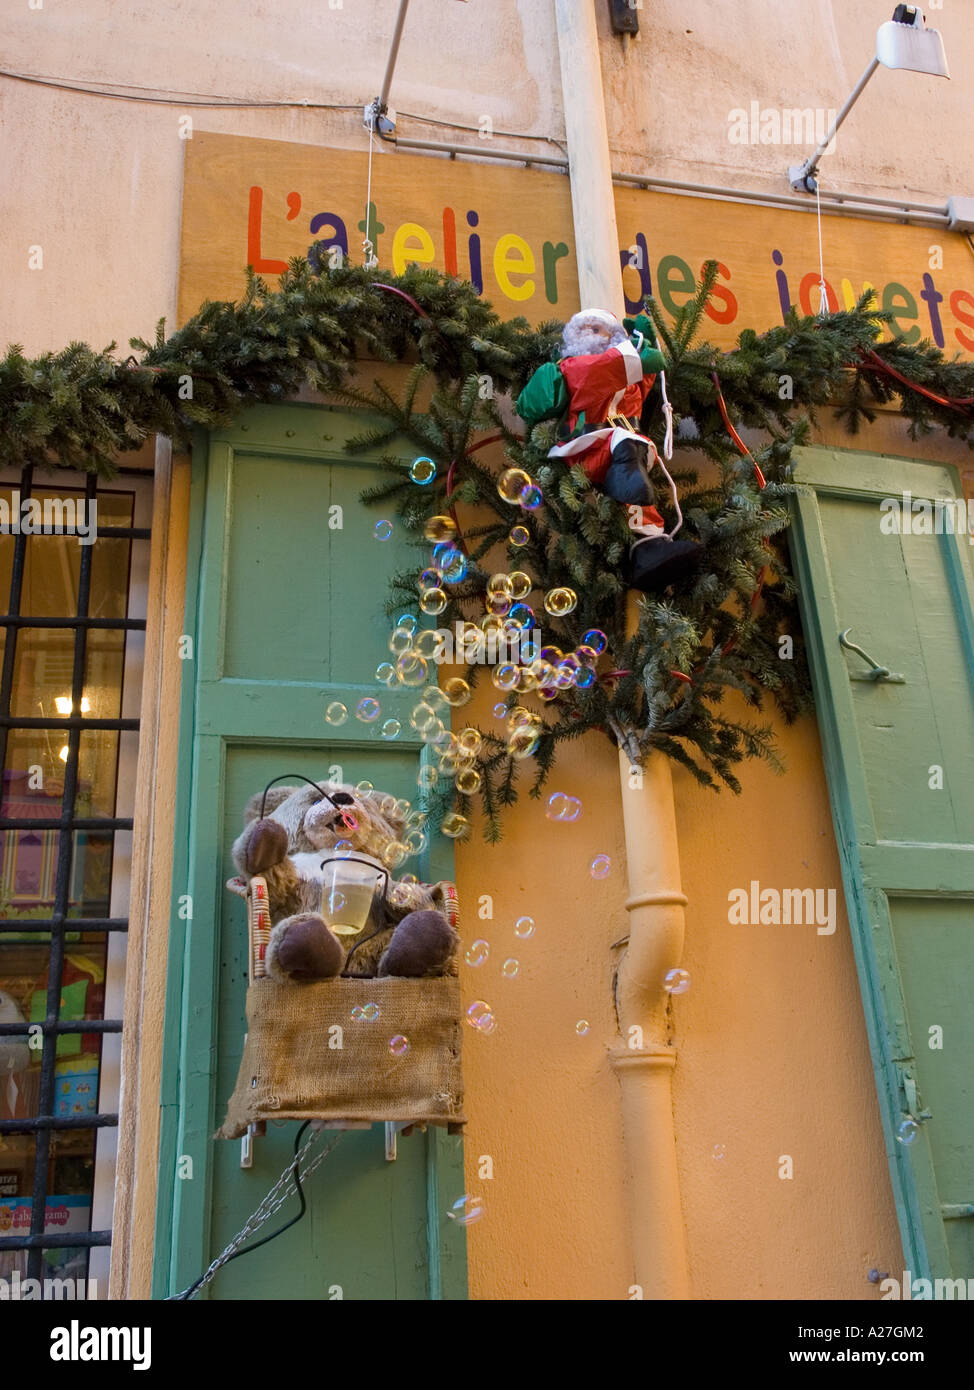 Innovative marketing displayed by a joke and toy shop in Nice, France. Santa climbs a drainpipe while a teddy-bear blows bubbles Stock Photo